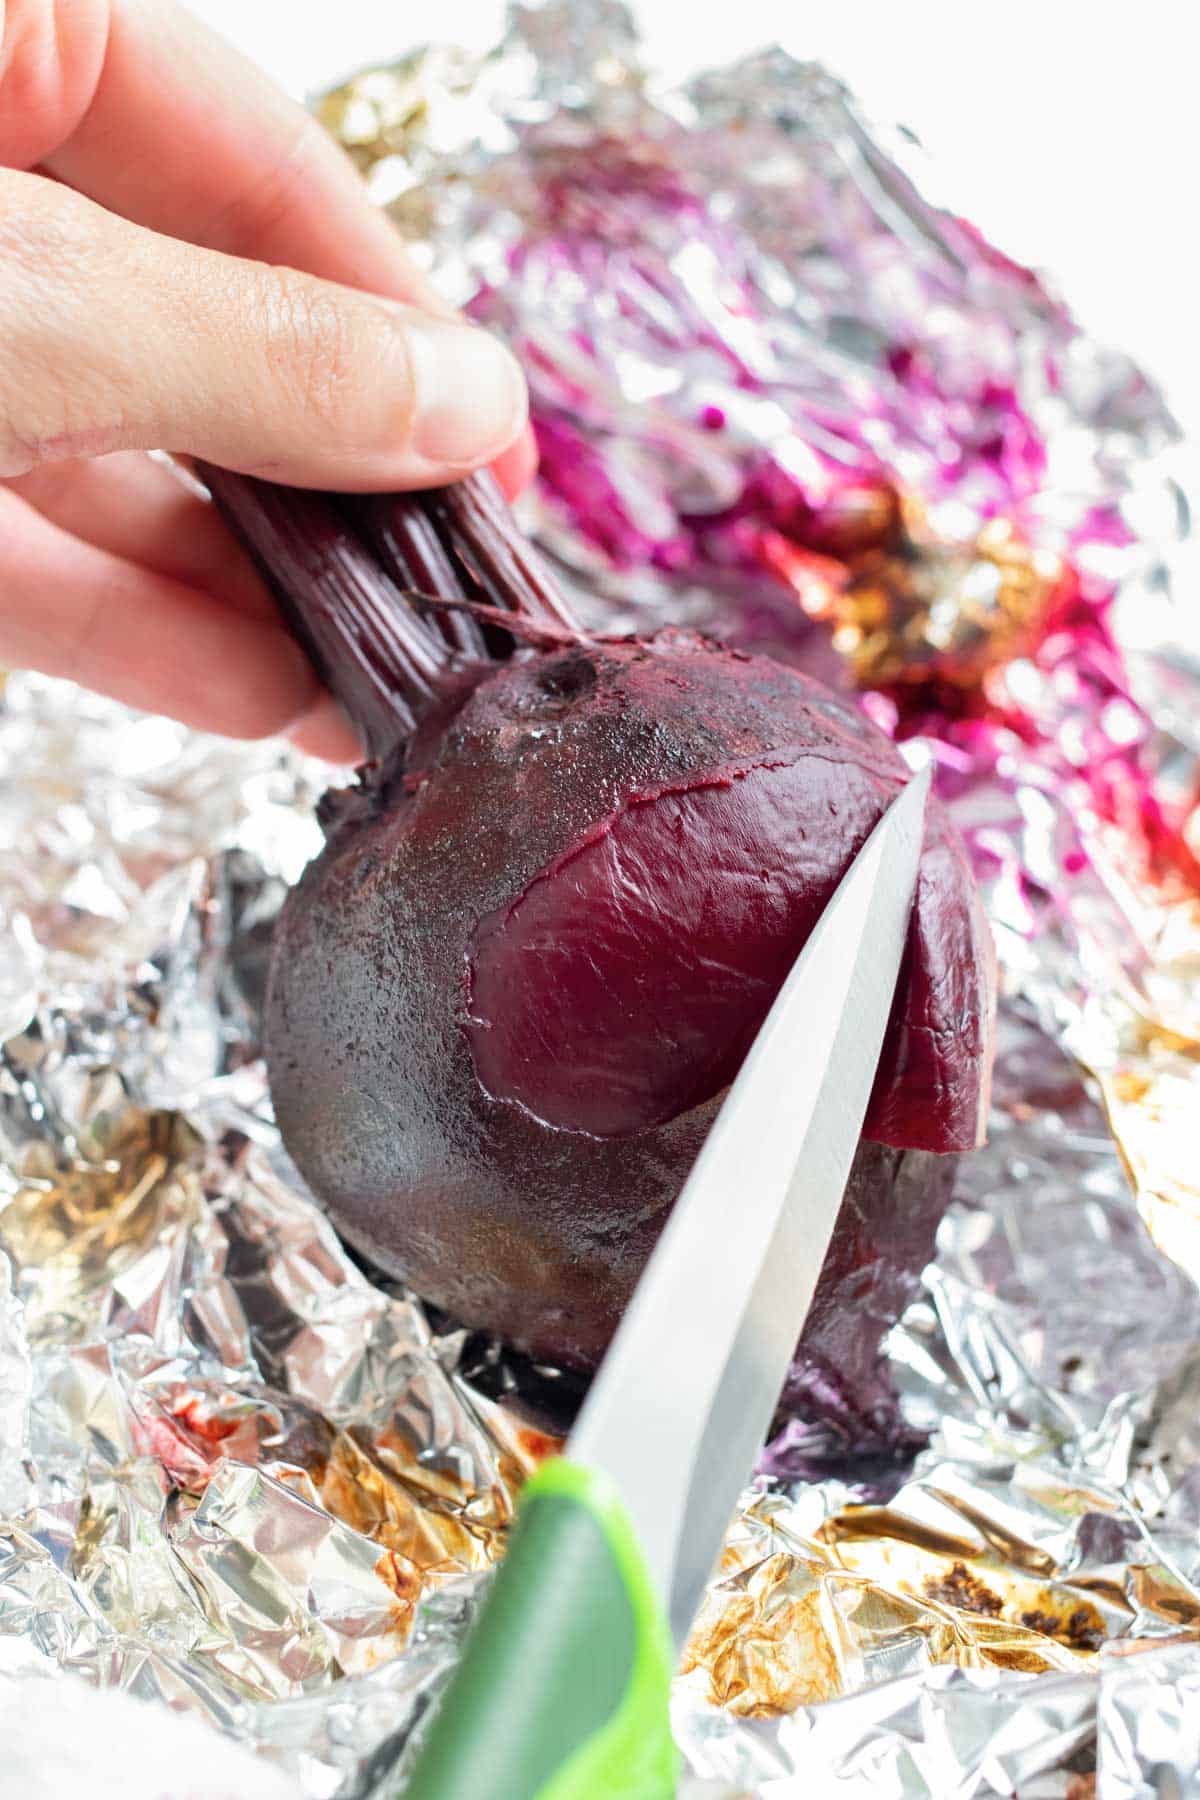 Beets roasted in the oven in aluminum foil are peeled with a pairing knife.